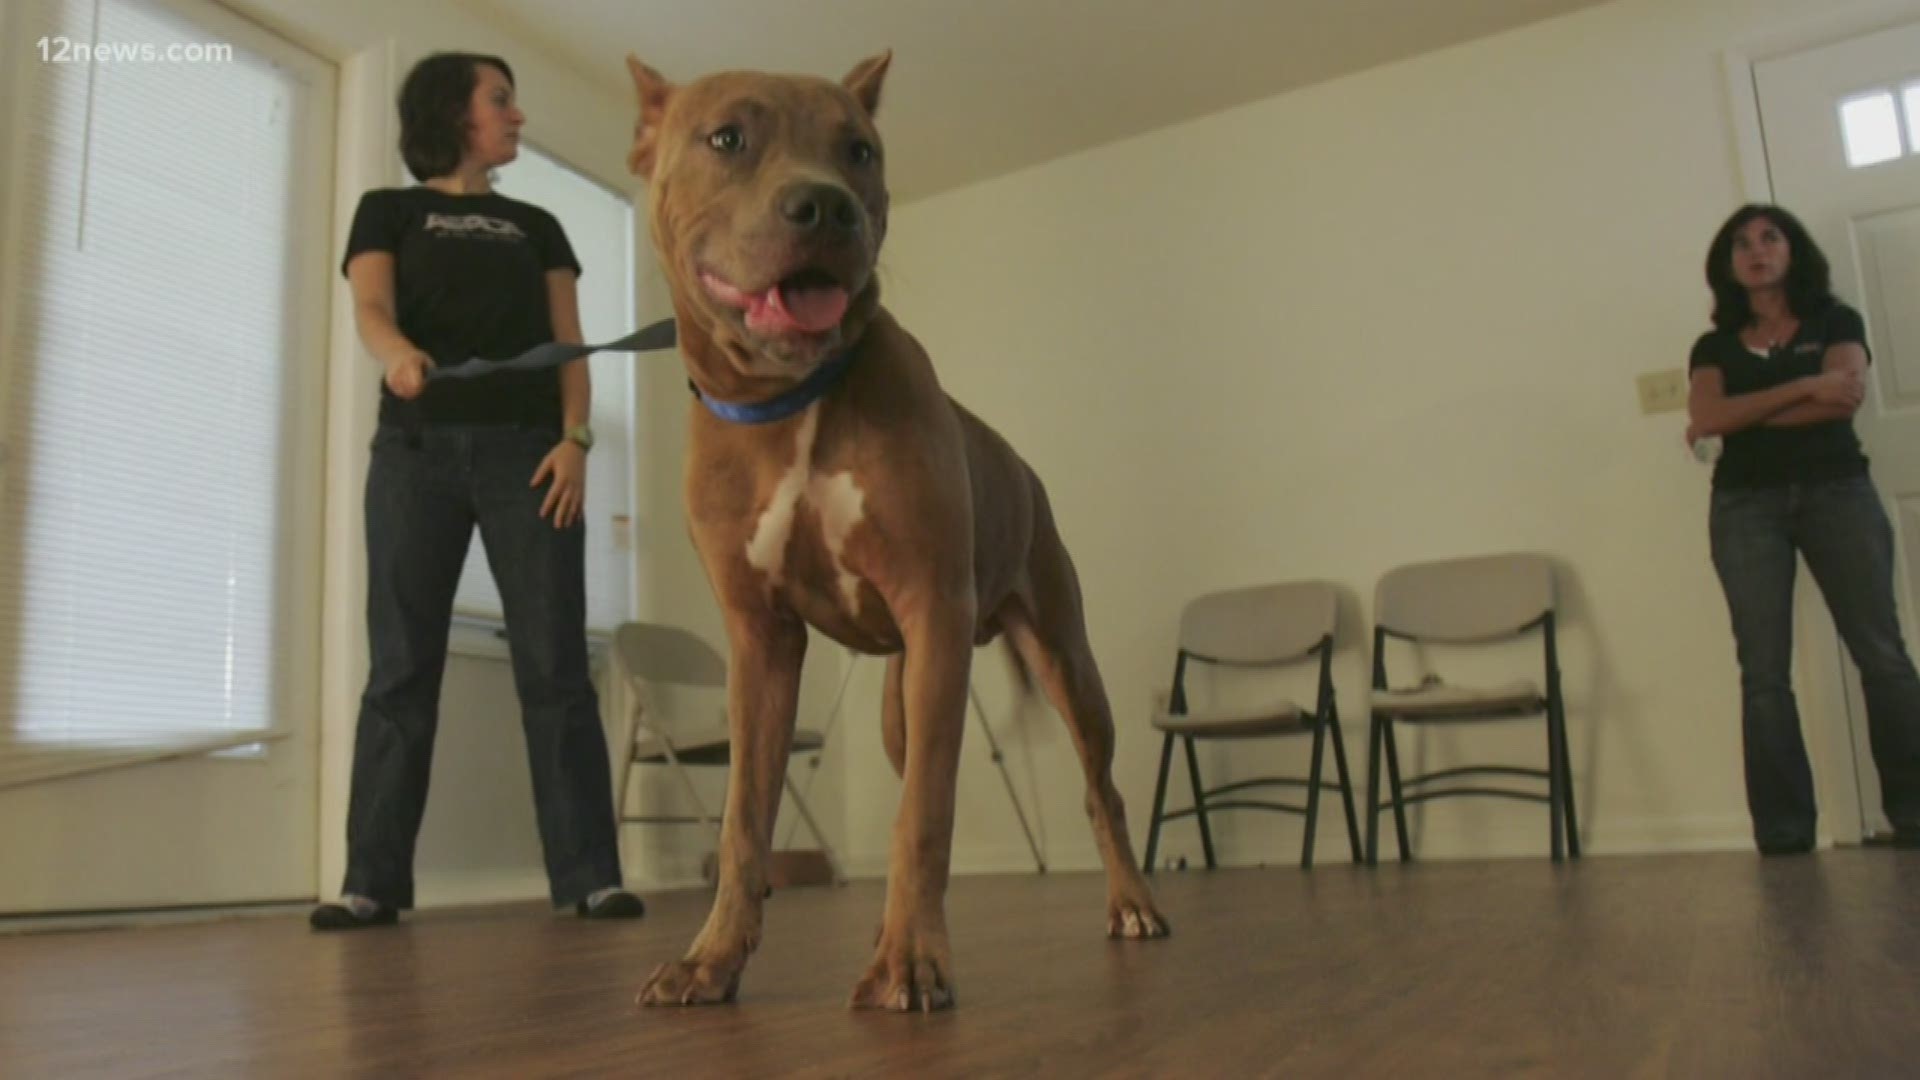 Maricopa county officials push effort to spay and neuter pit bulls in high poverty Phoenix neighborhoods, and educate the community on how to handle them.